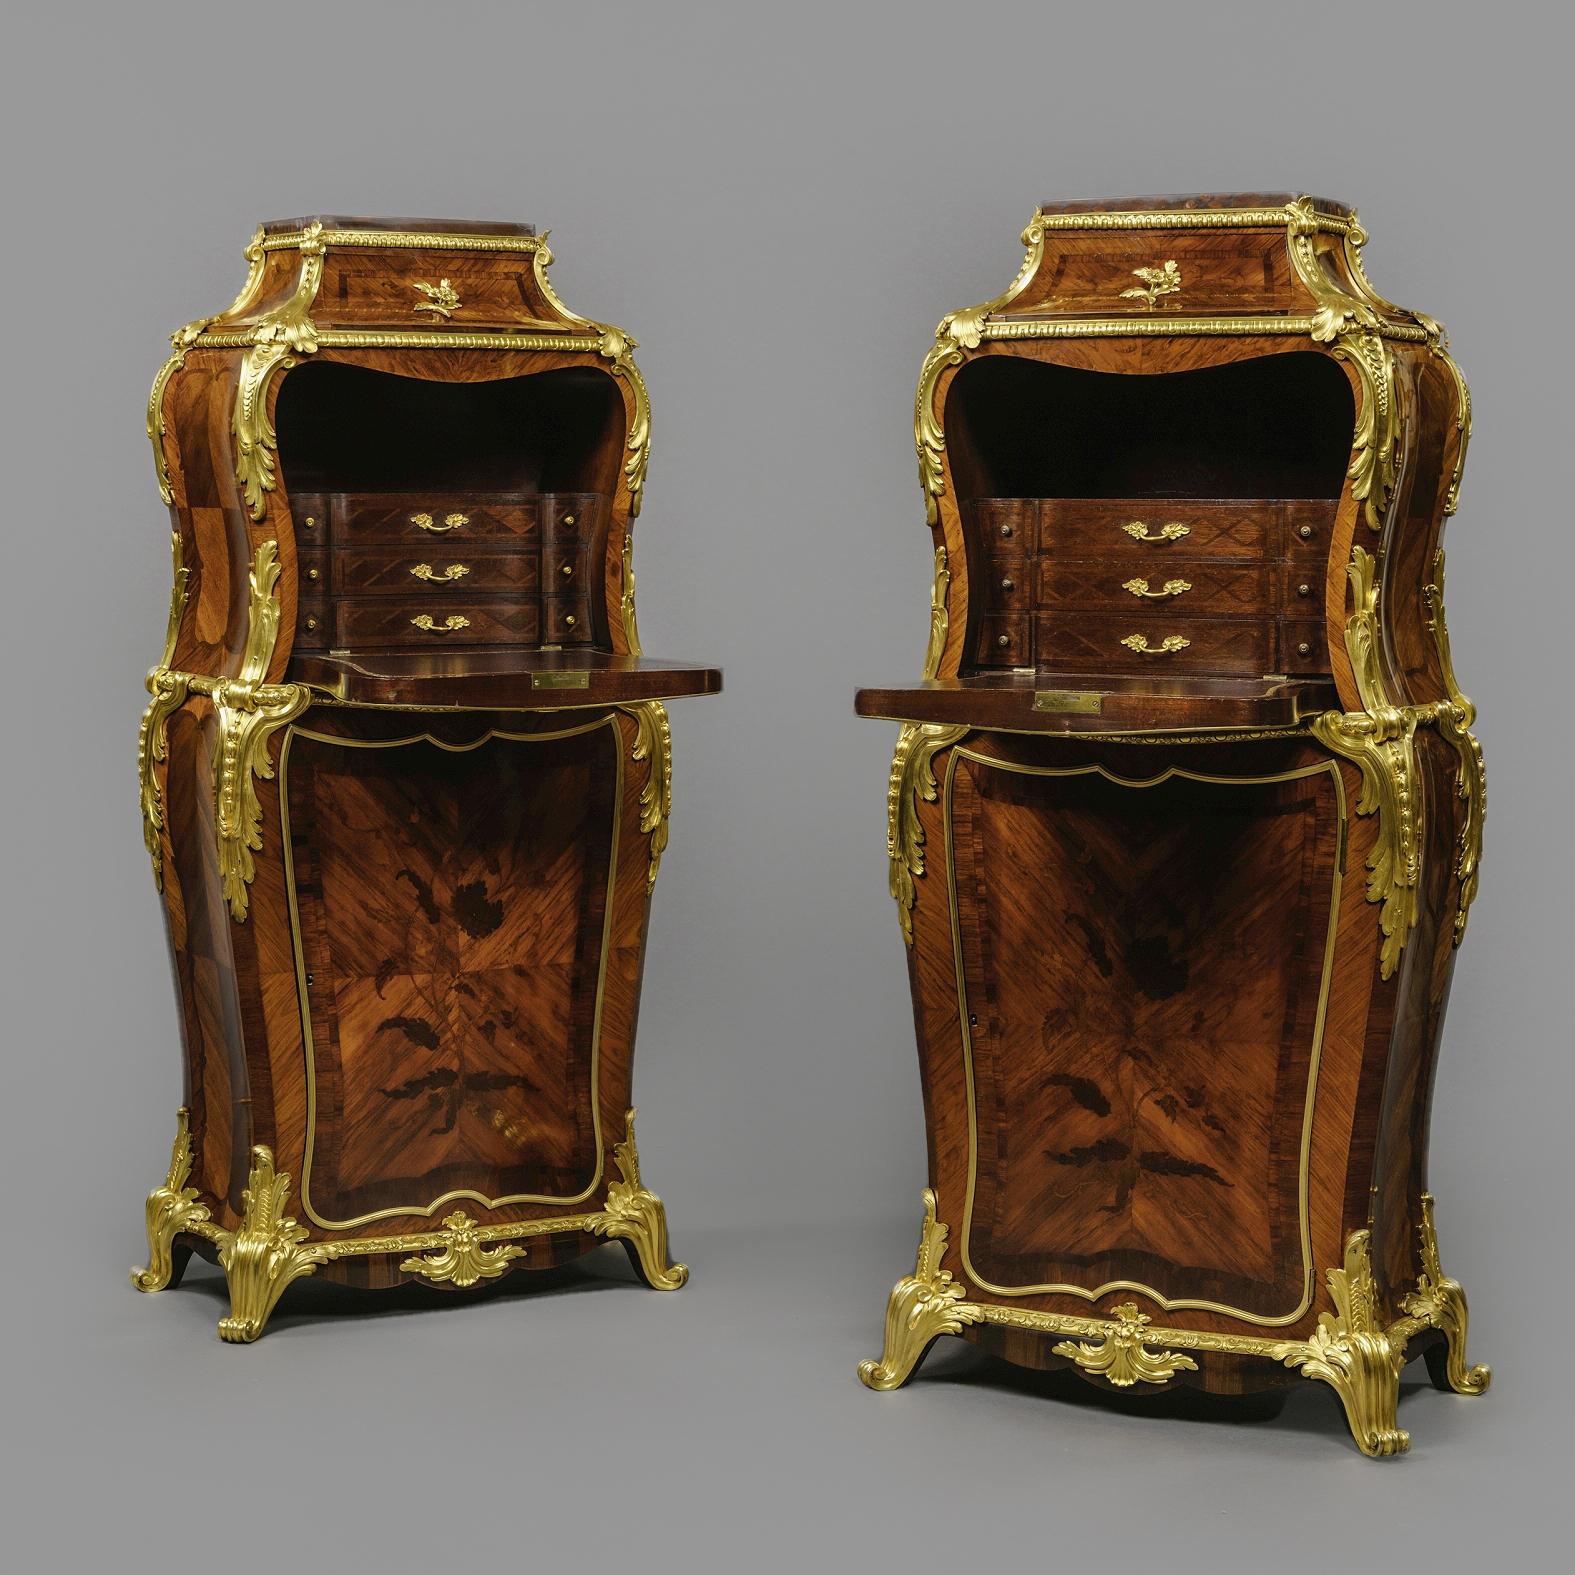 This remarkable pair of Louis XV style secrétaires are based on the celebrated model by Jean-François Dubut (maître in 1760), illustrated in P. Kjellberg, 